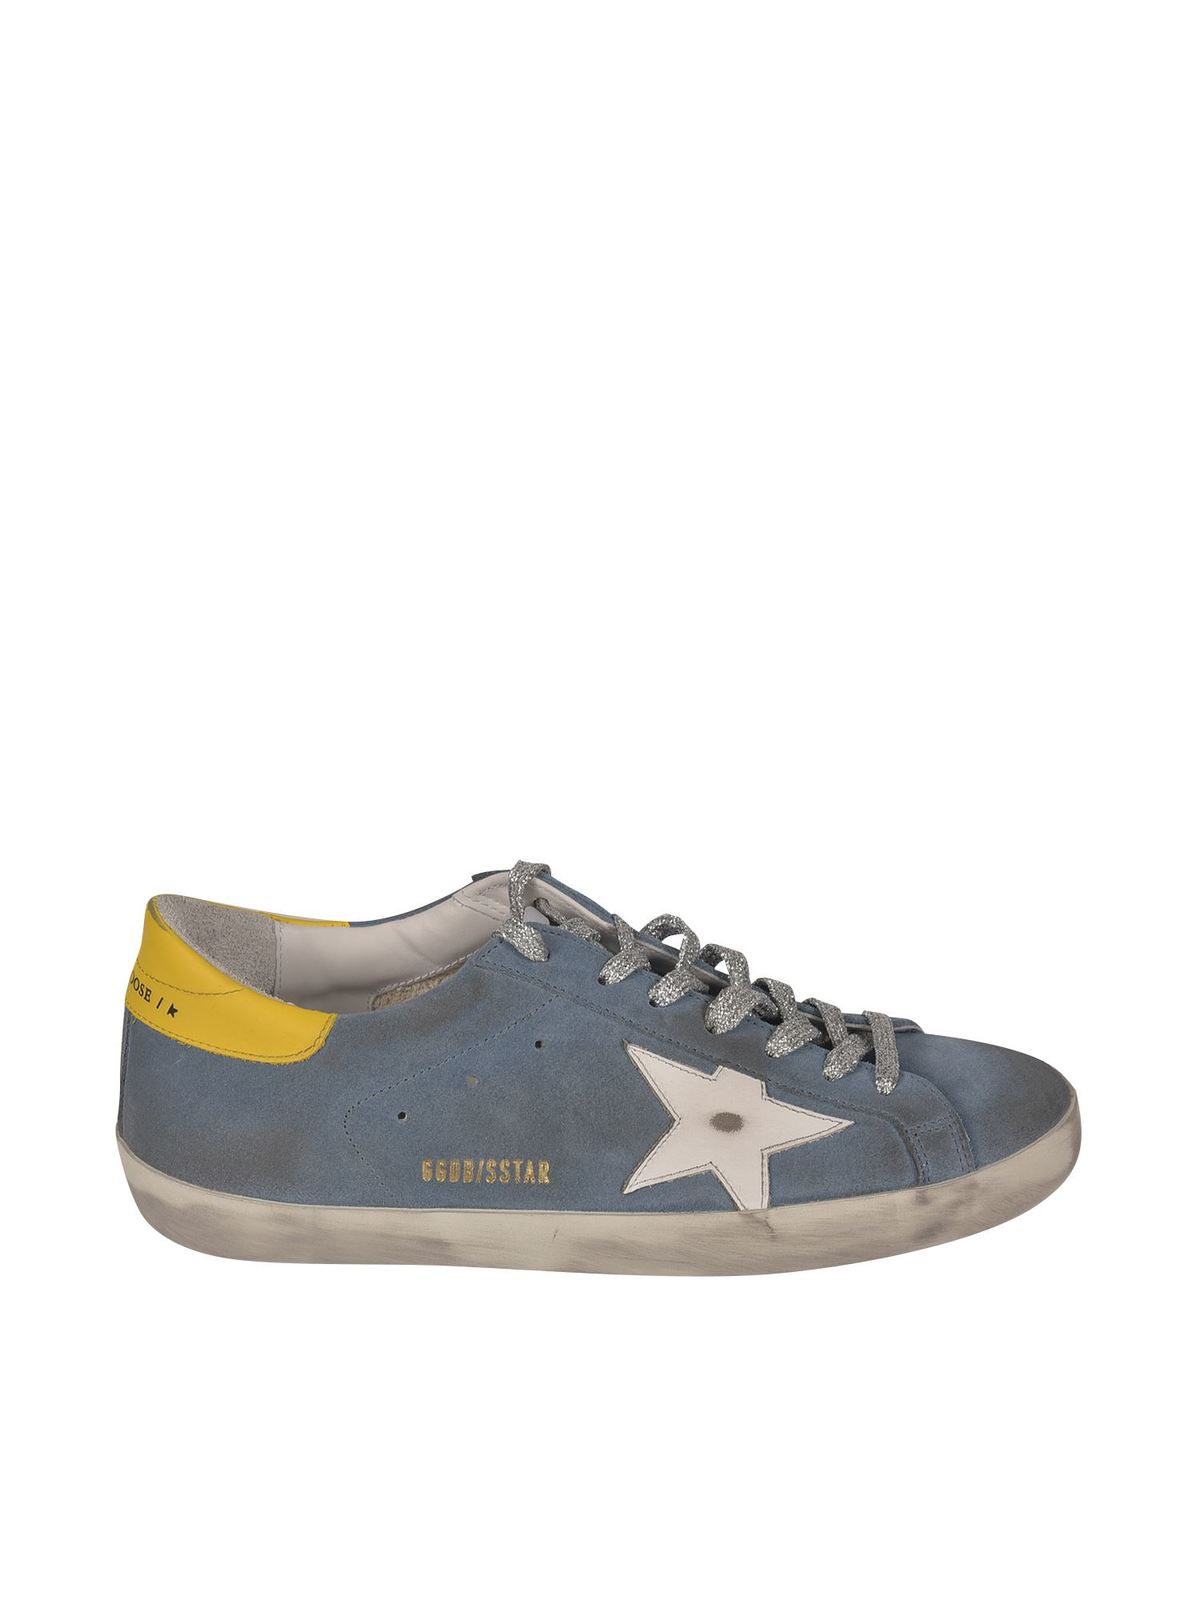 GOLDEN GOOSE SUPER STAR CLASSIC SNEAKERS IN BLUE AND YELLO